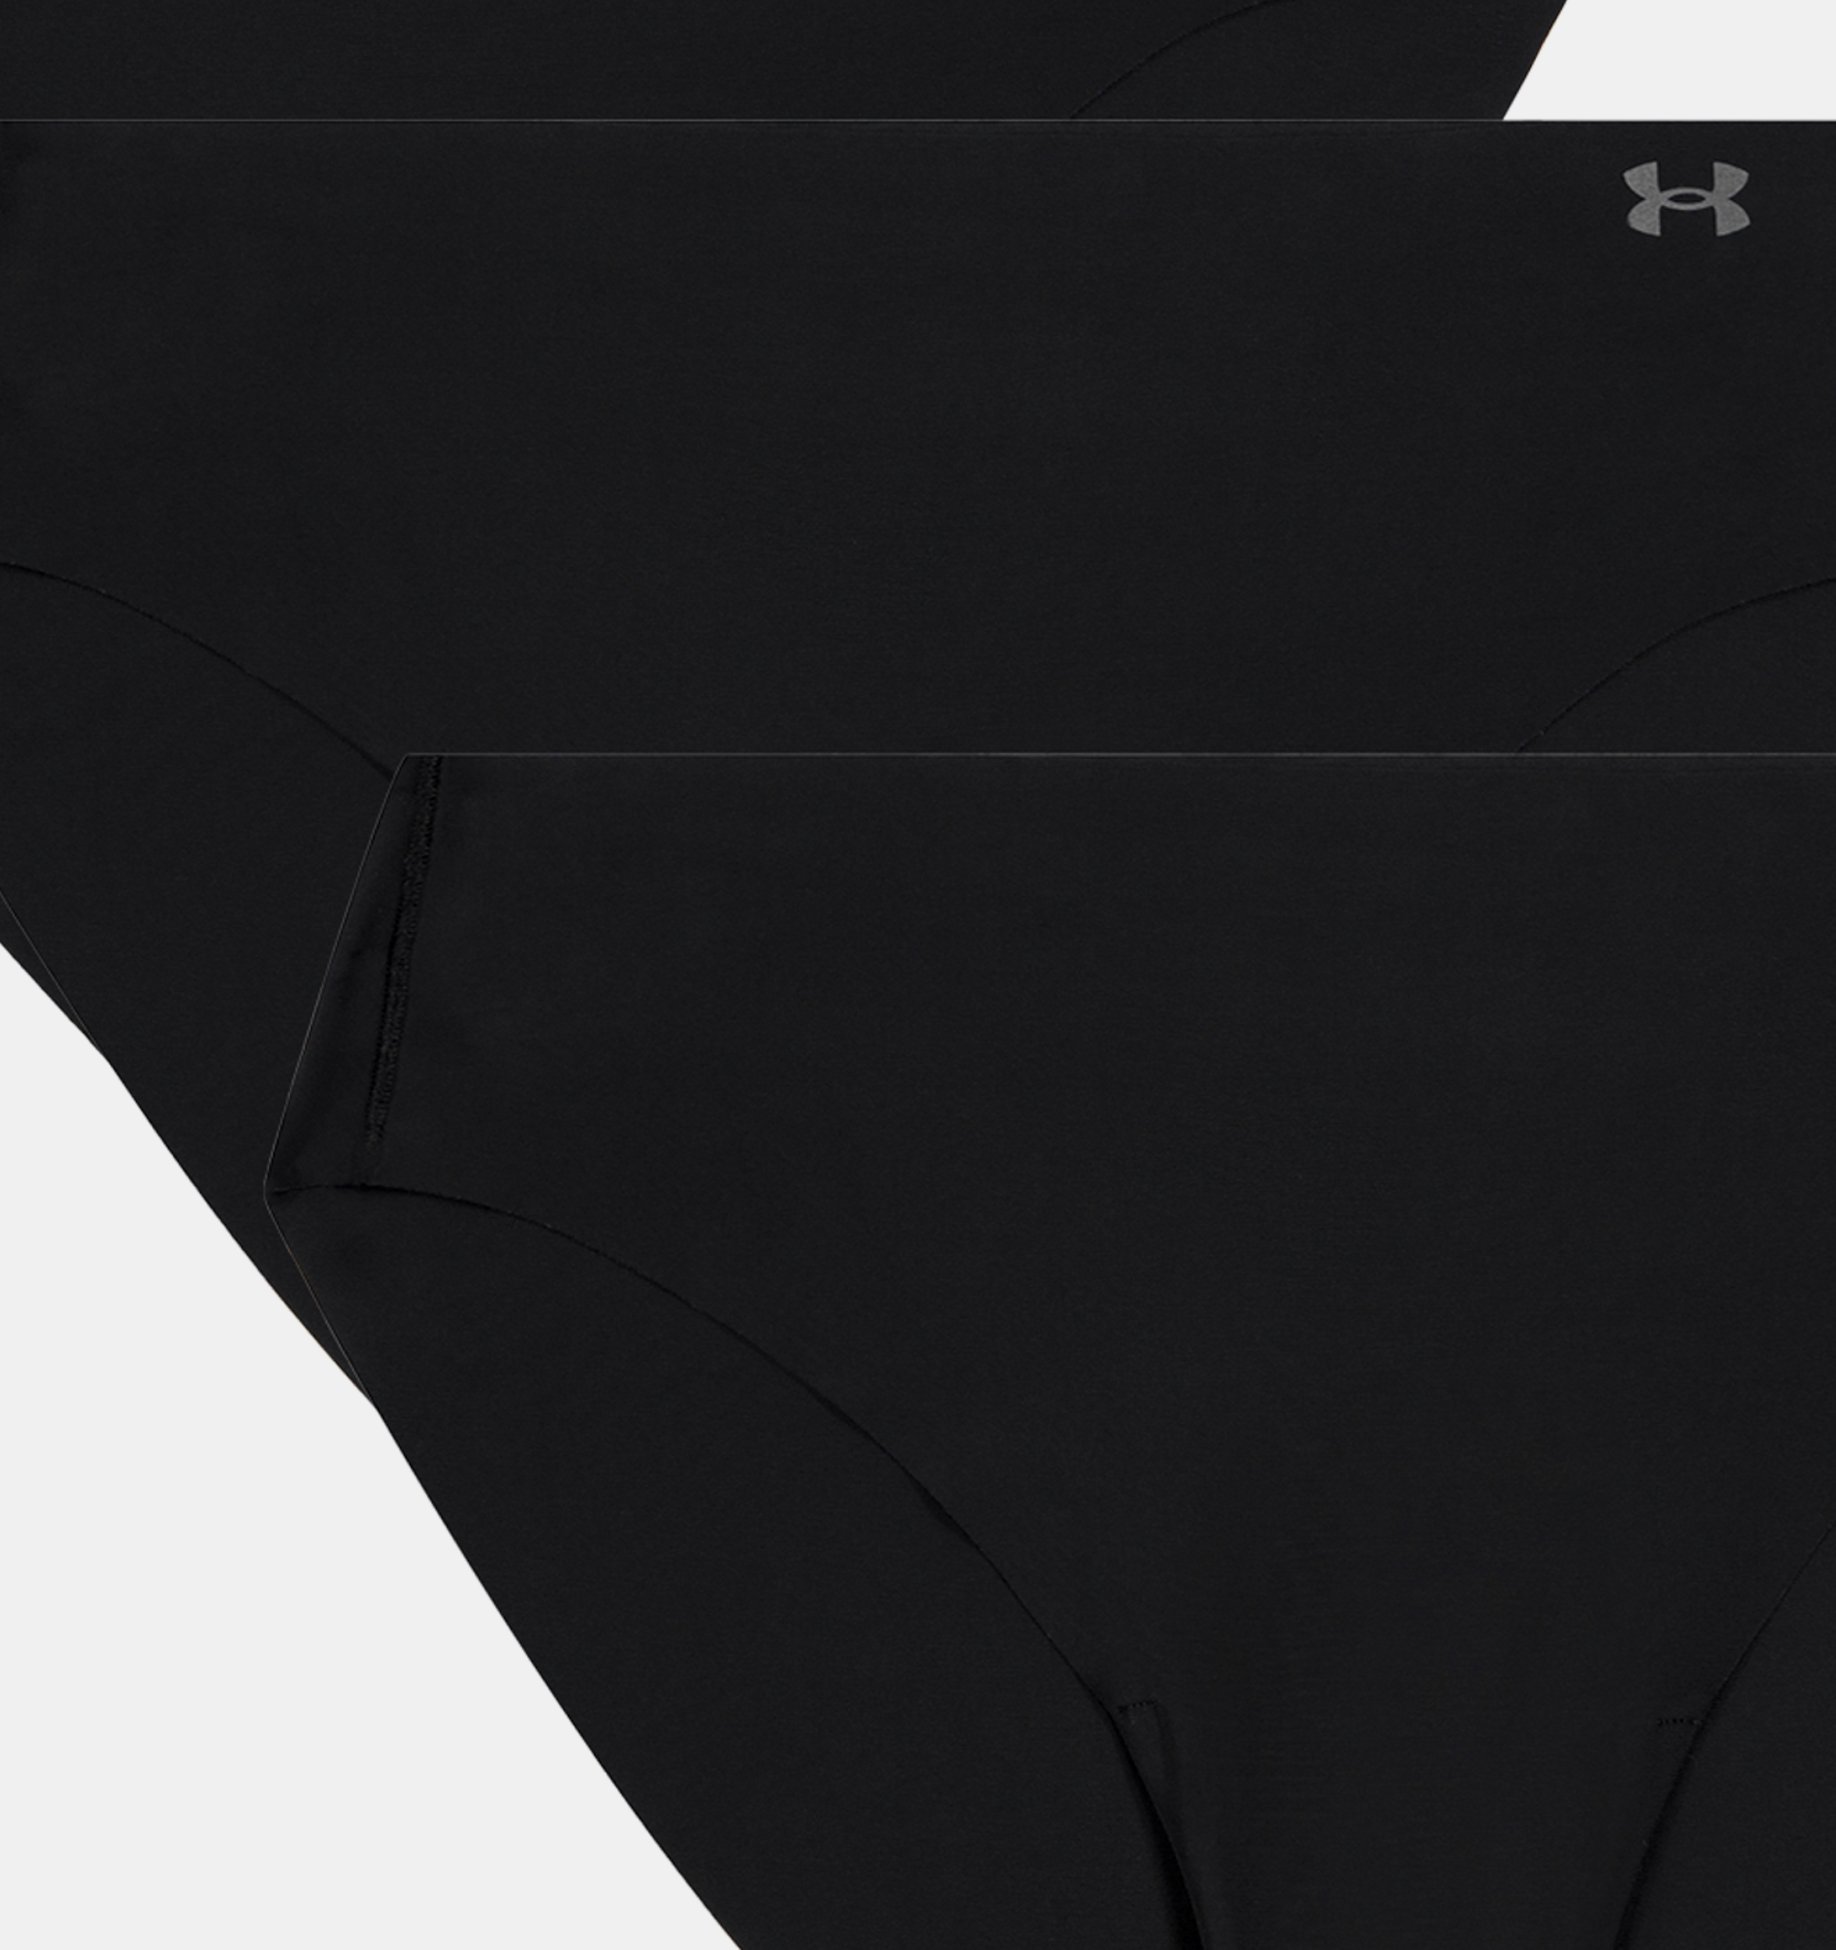 https://underarmour.scene7.com/is/image/Underarmour/PS1383897-001_F?rp=standard-0pad|pdpZoomDesktop&scl=0.72&fmt=jpg&qlt=85&resMode=sharp2&cache=on,on&bgc=f0f0f0&wid=1836&hei=1950&size=1500,1500